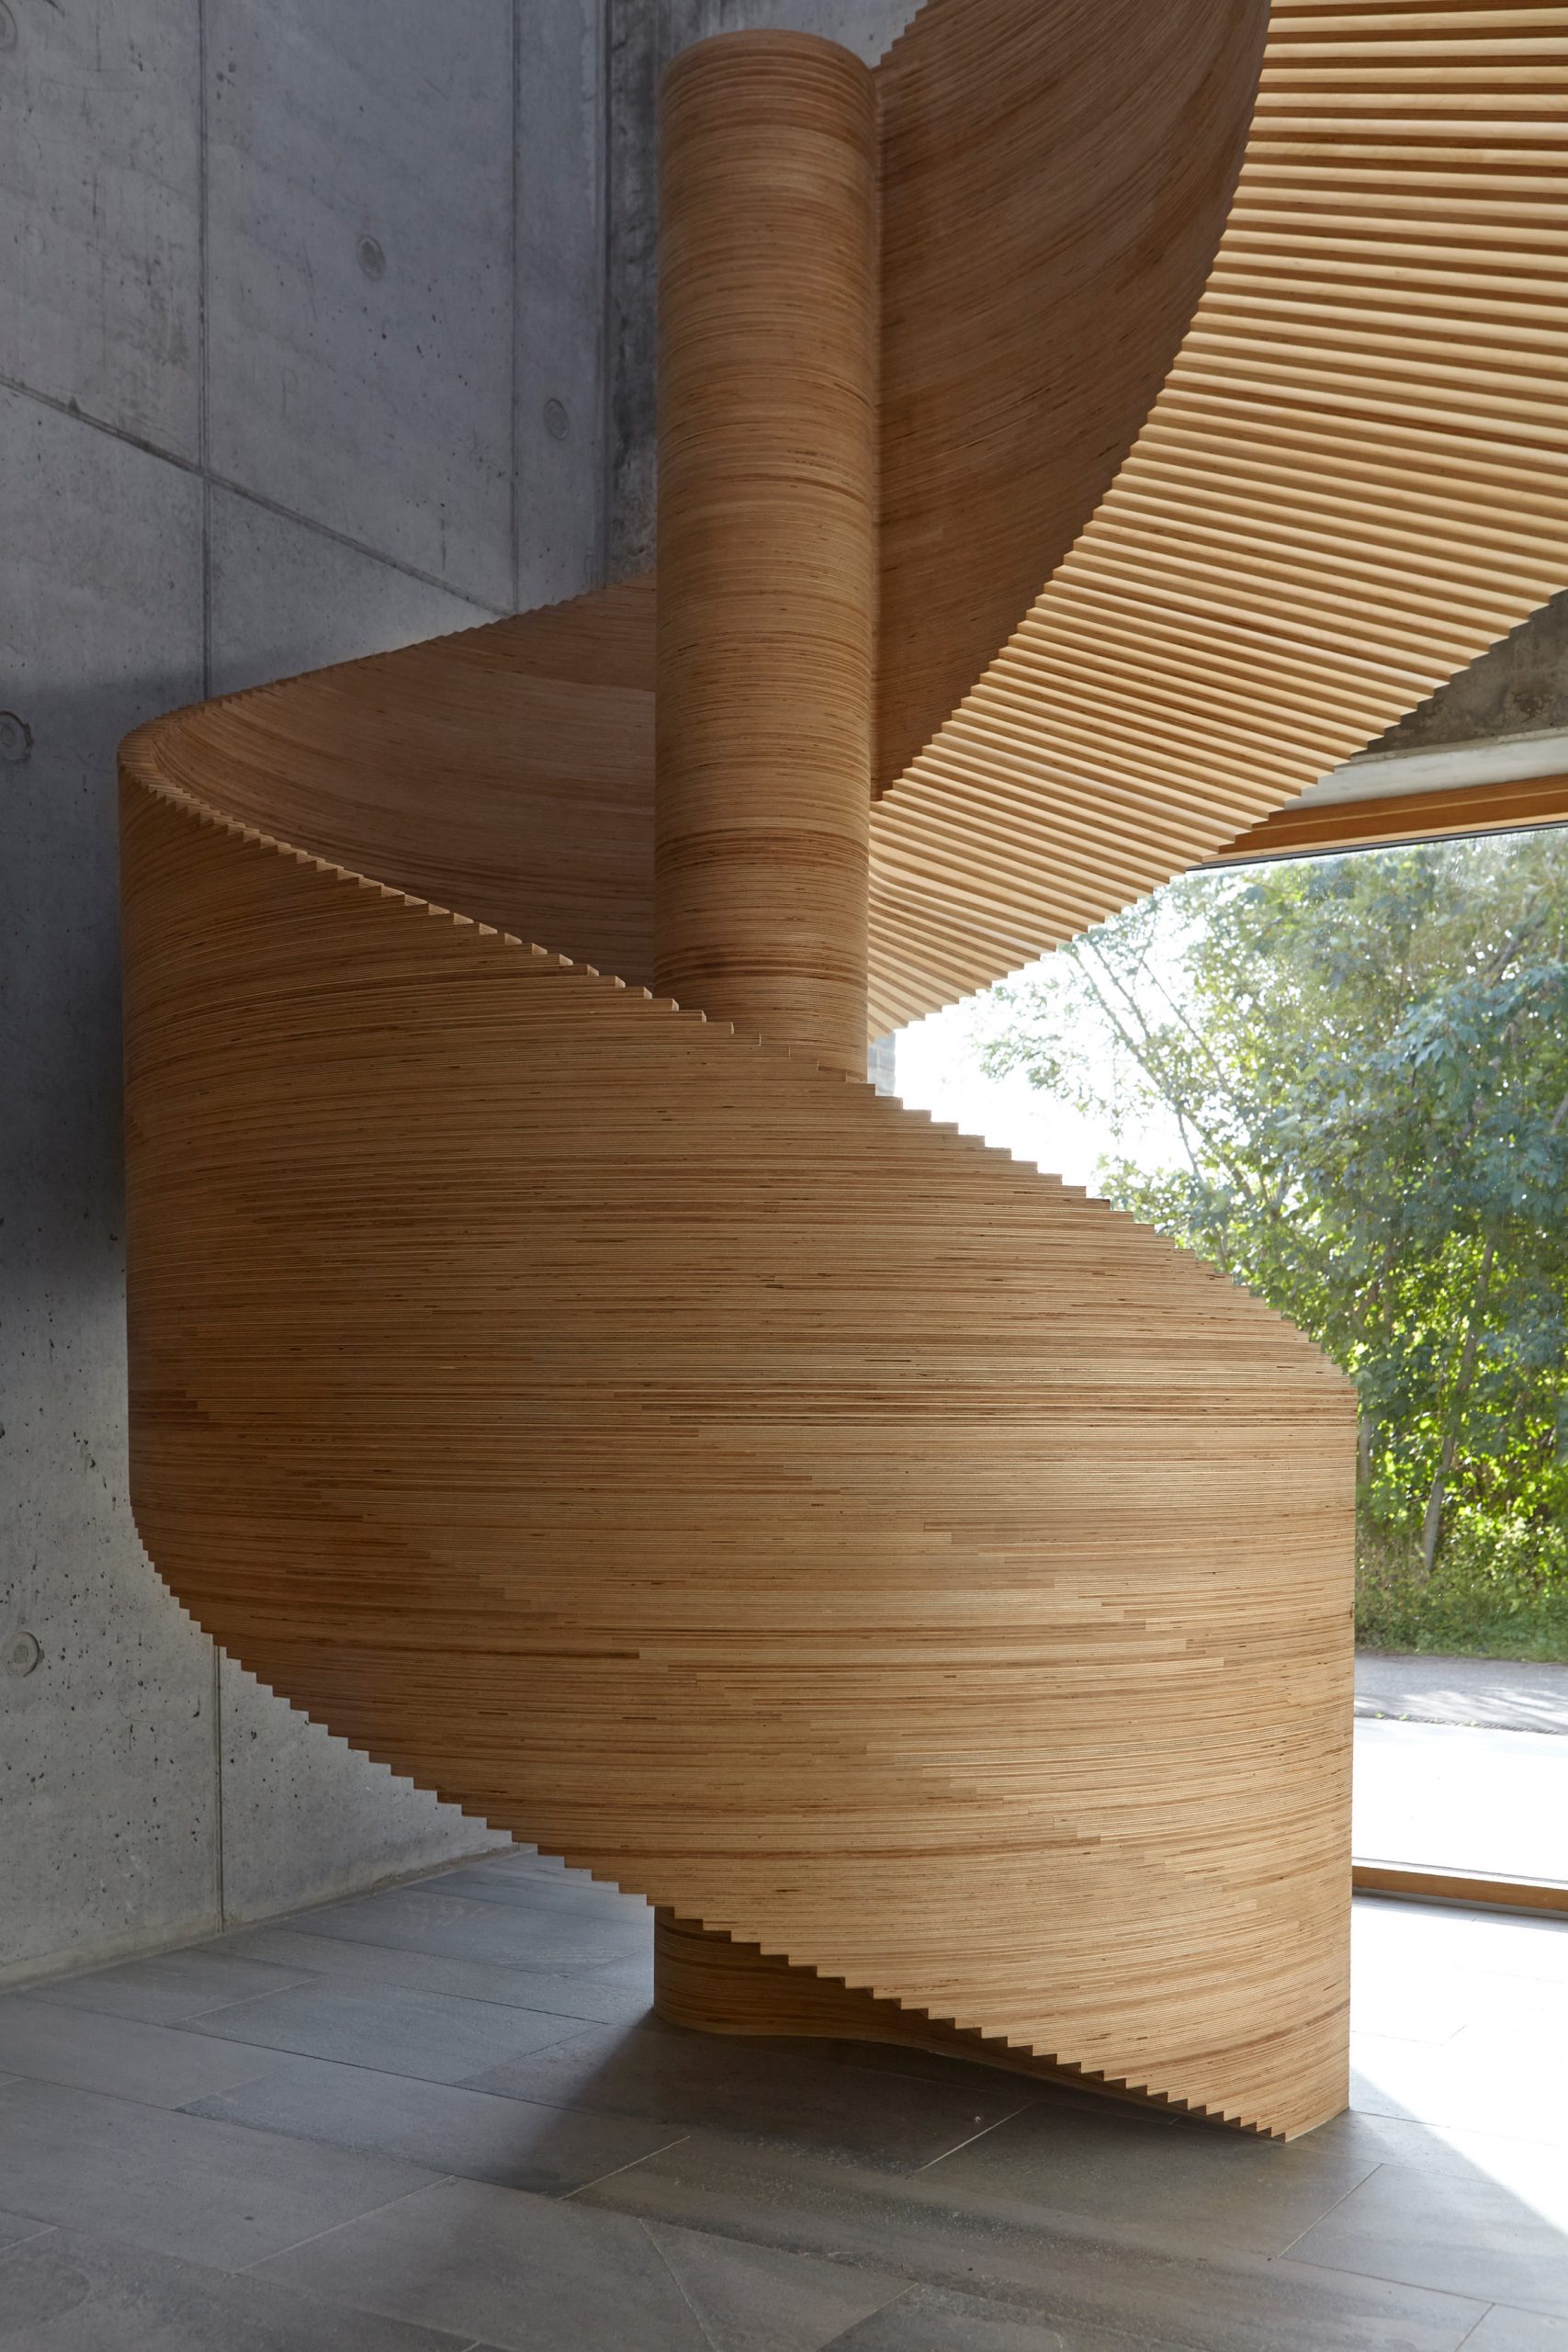 Spiral staircase in Tommy Rand house in Denmark